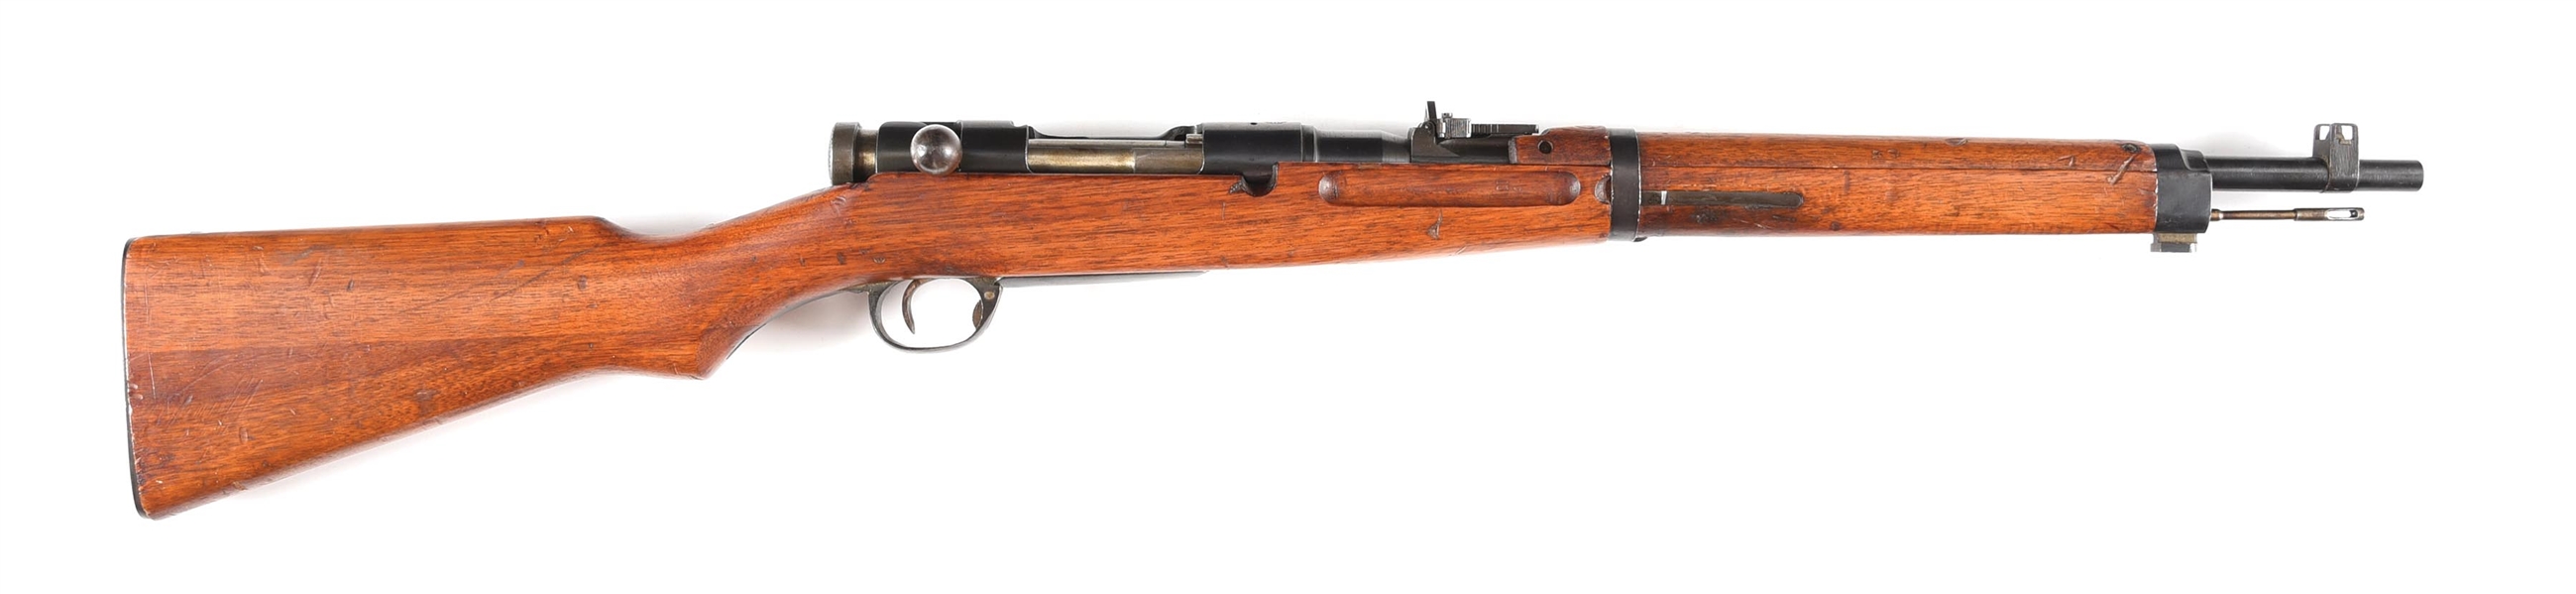 (C) EXCEPTIONAL & ALL MATCHING IMPERIAL JAPANESE MUKDEN ARSENAL SERIES 6 TYPE 38 BOLT ACTION CARBINE.